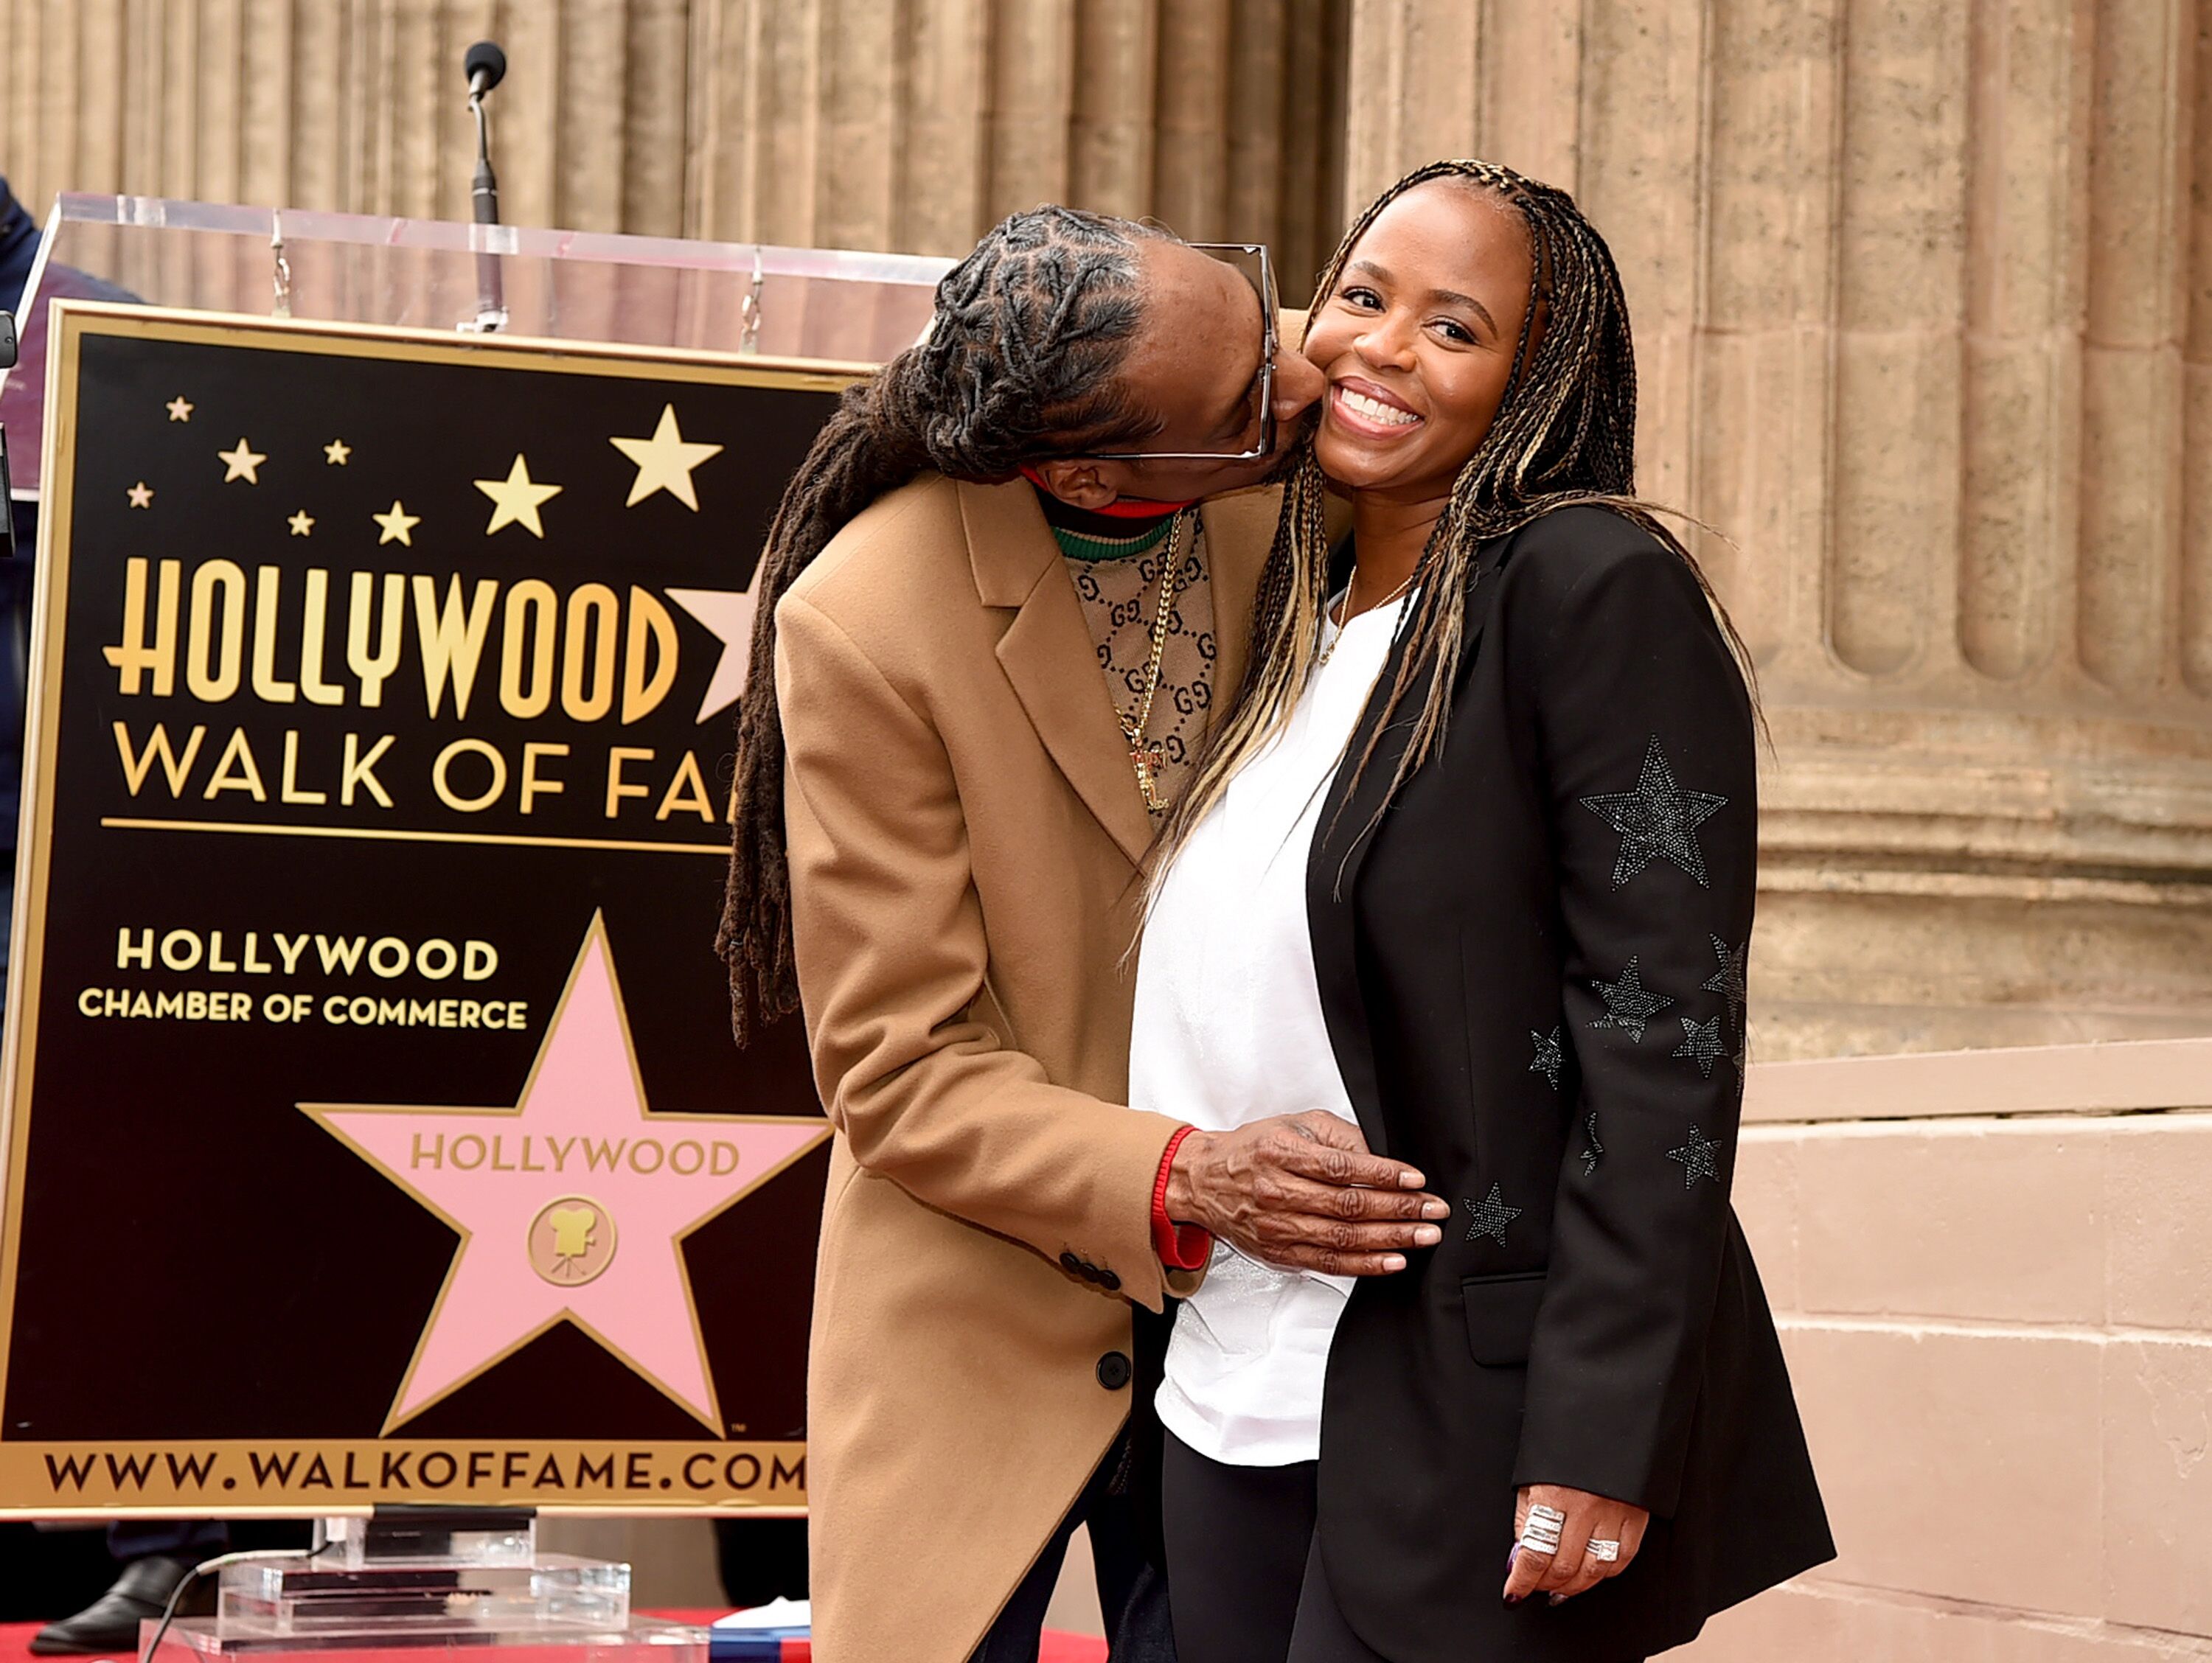 Snoop and his wife Shante at his Hollywood Walk of Fame ceremony | Source: Getty Images/GlobalImagesUkraine